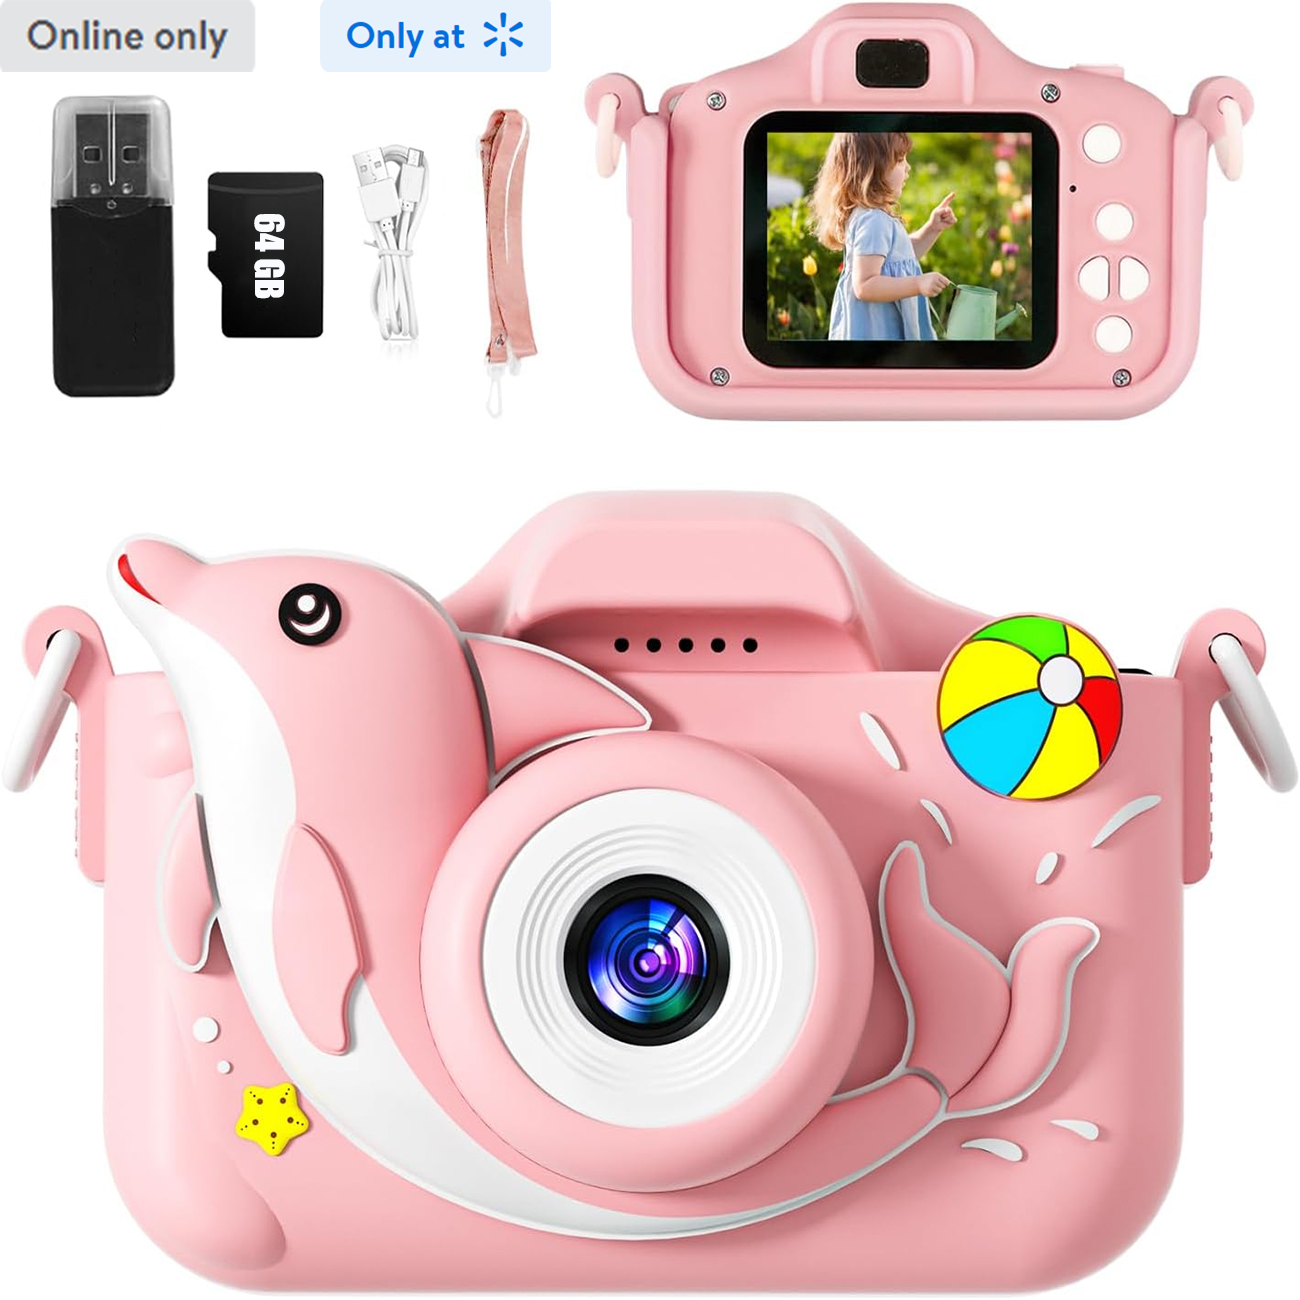 Exciting HD Digital Video Kids Camera - Top Christmas Gift for Girls/Boys Age 3-12! Selfie Camera, Games, 1080P Video, 64GB SD Card Included